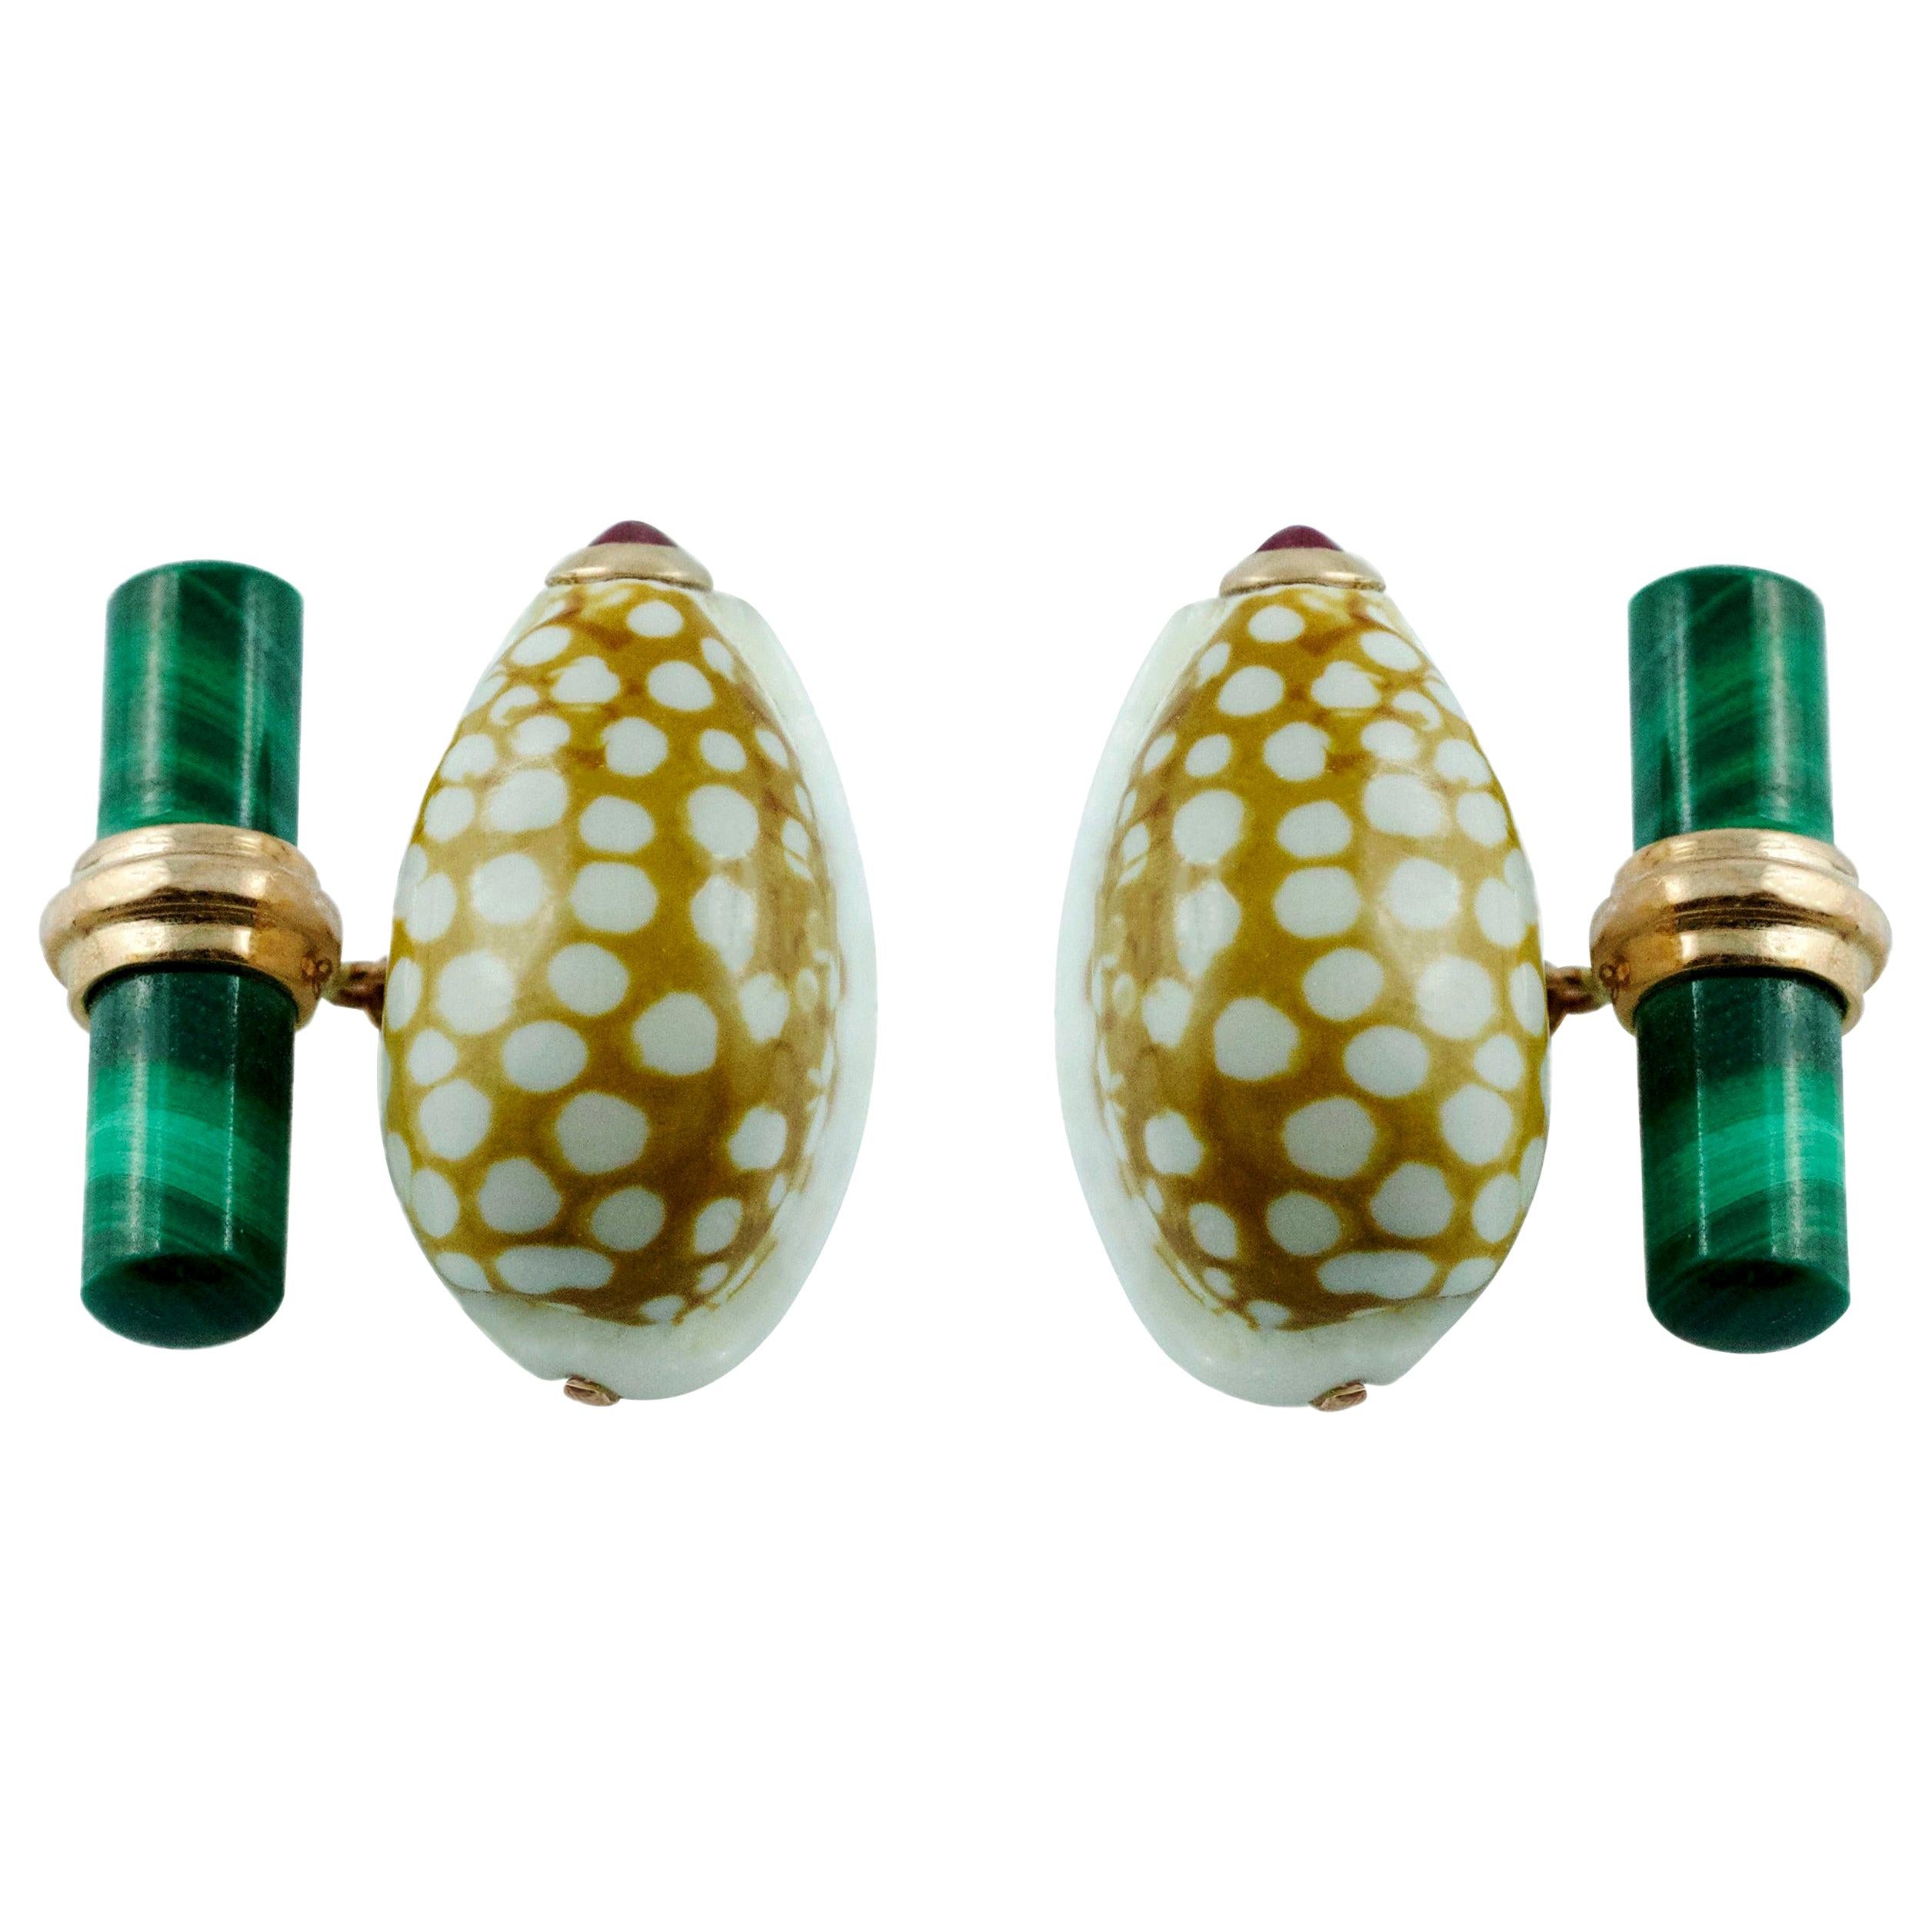 Rose Gold Shell Cufflinks with Malachite and Cabochon Rubies